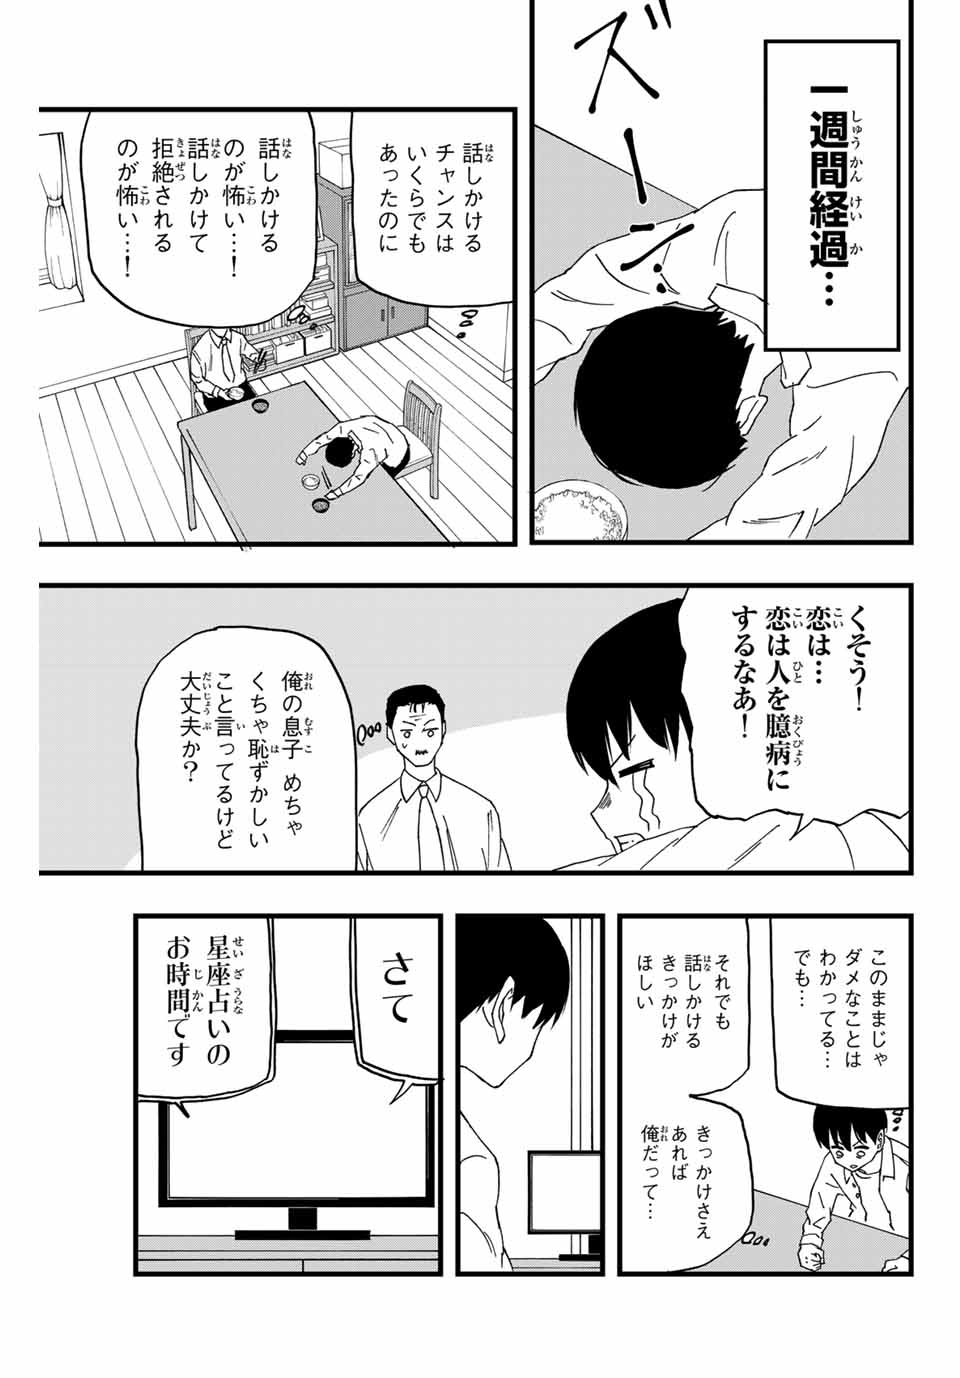 LoVE GAME 第2話 - Page 21